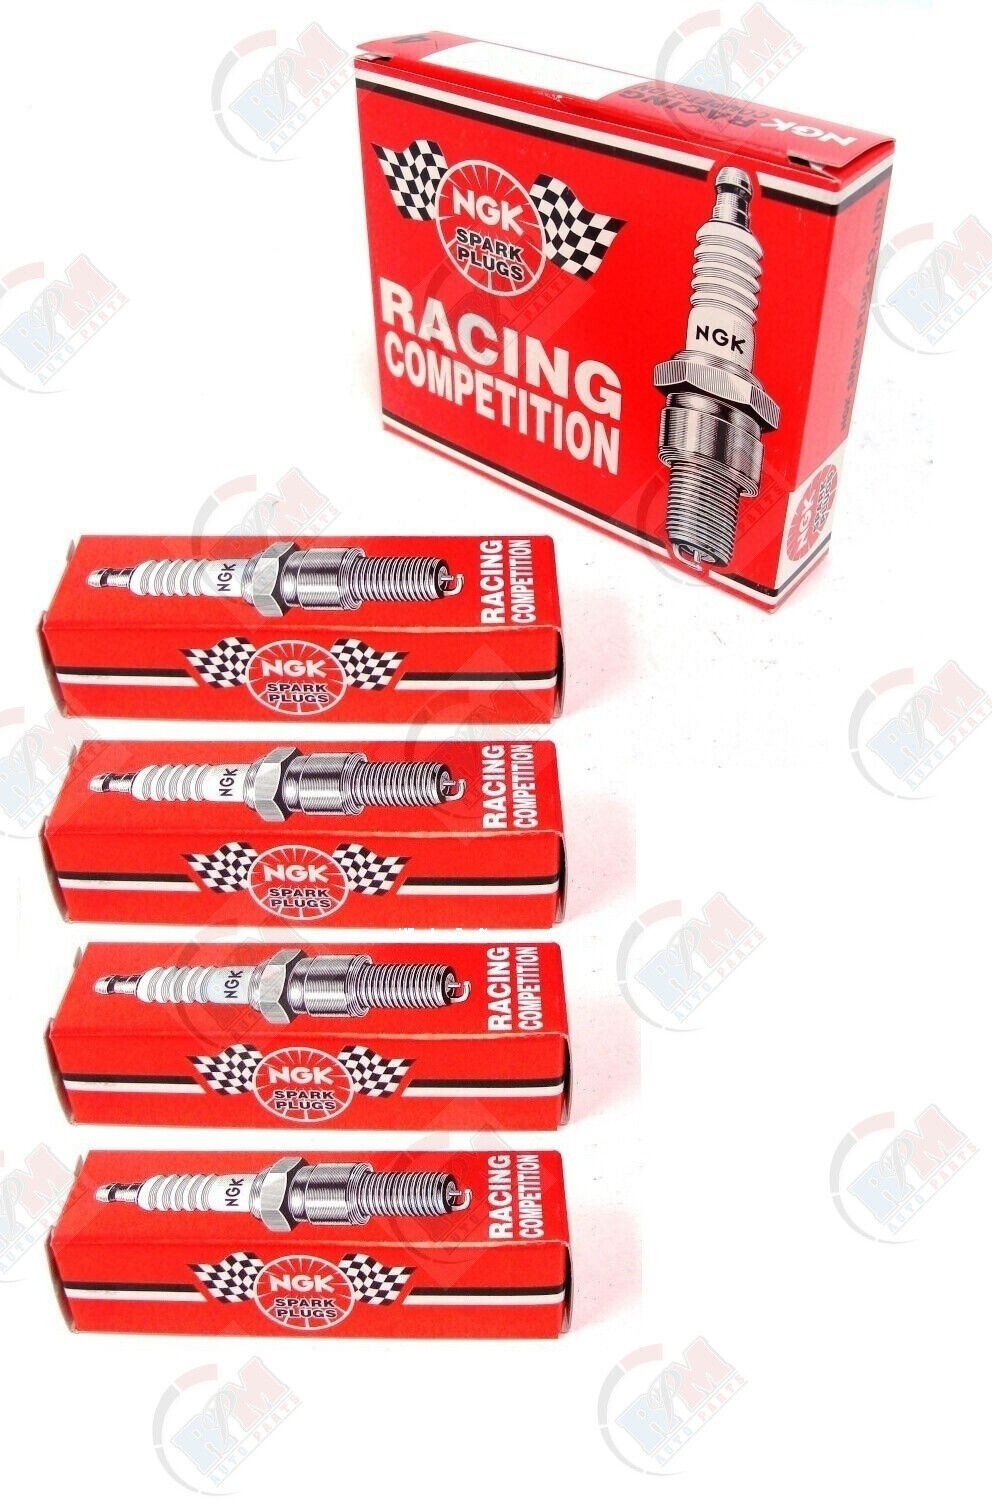 NGK RACING COMPETITION 14mm Spark Plugs R5671A-10 5820 Set of 4